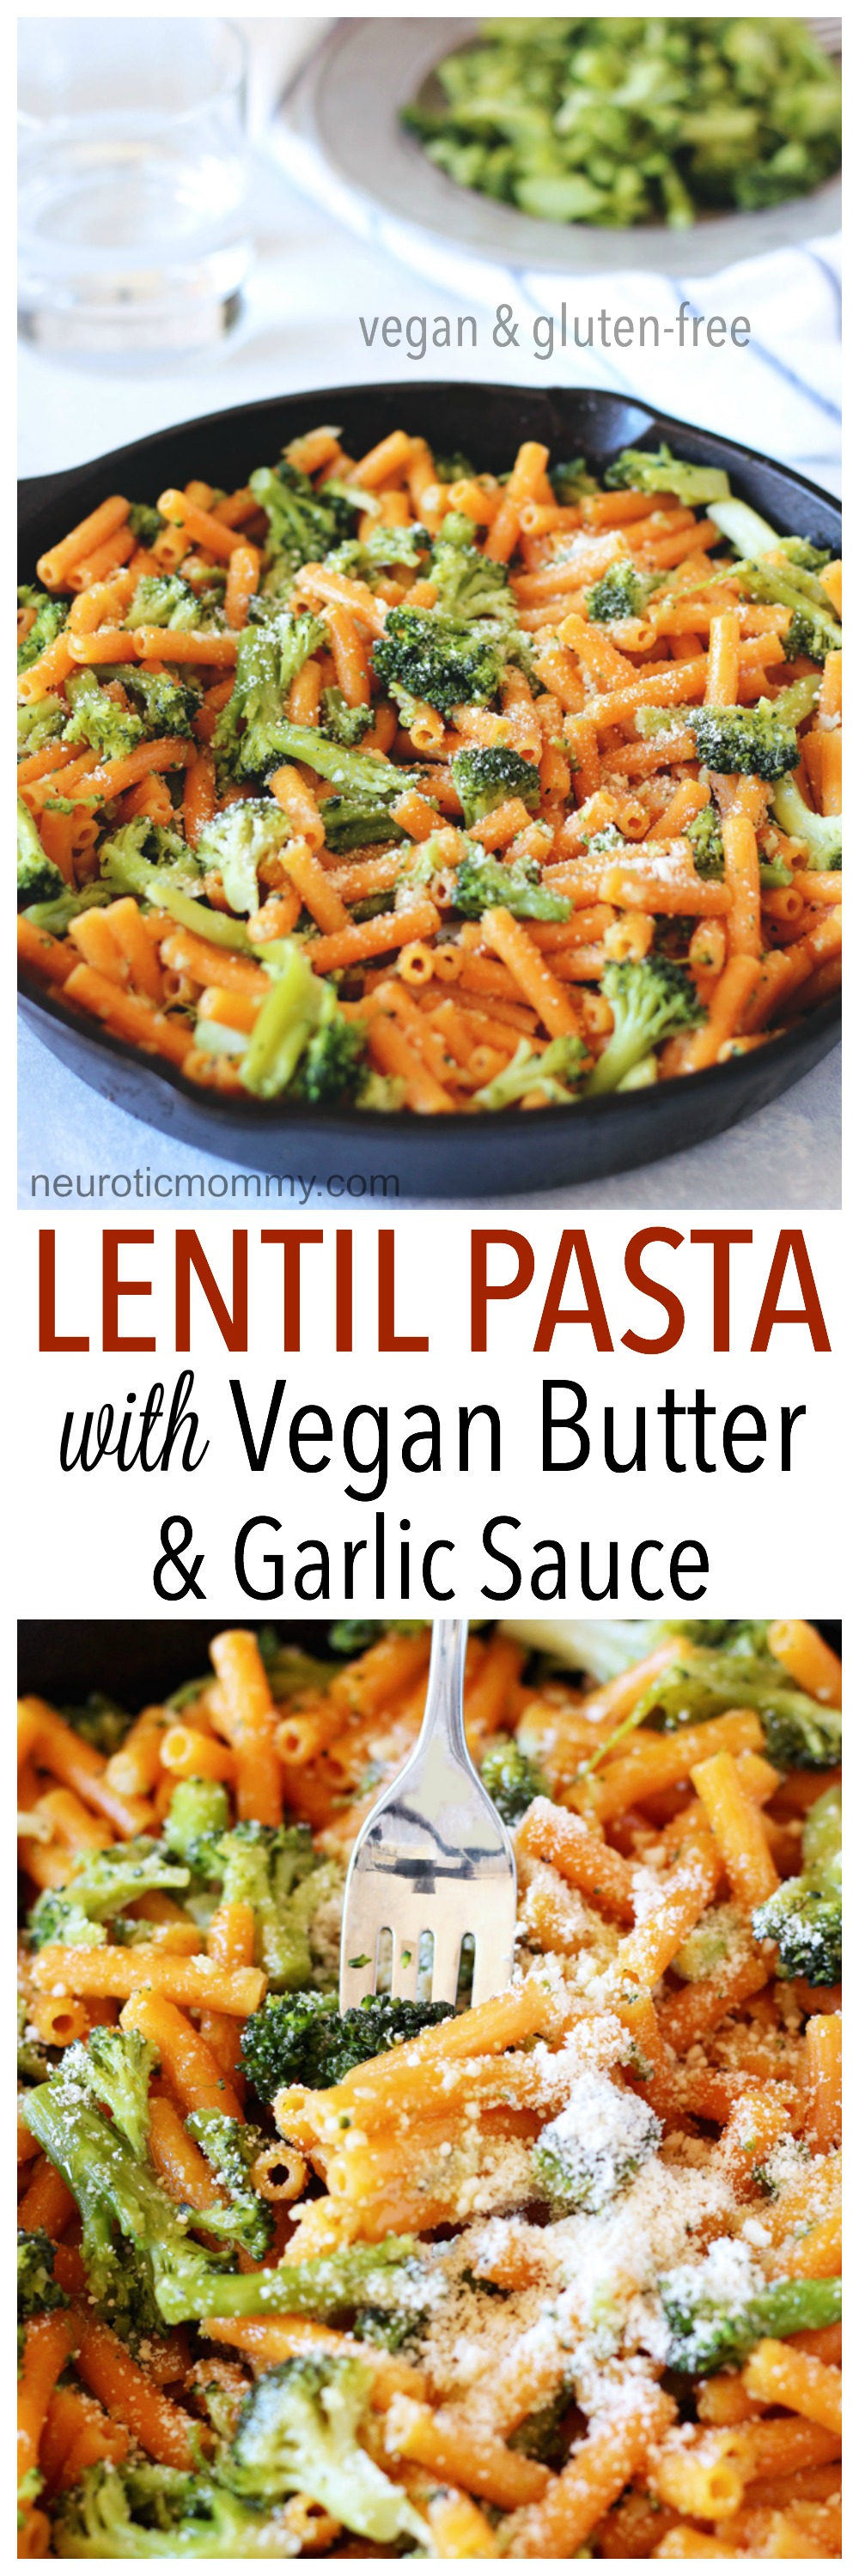 Lentil Pasta With Vegan Butter & Garlic Sauce - A super healthy easy dinner made in 15 minutes! A weeknight favorite. NeuroticMommy.com #vegandinners #plantbased #healthy